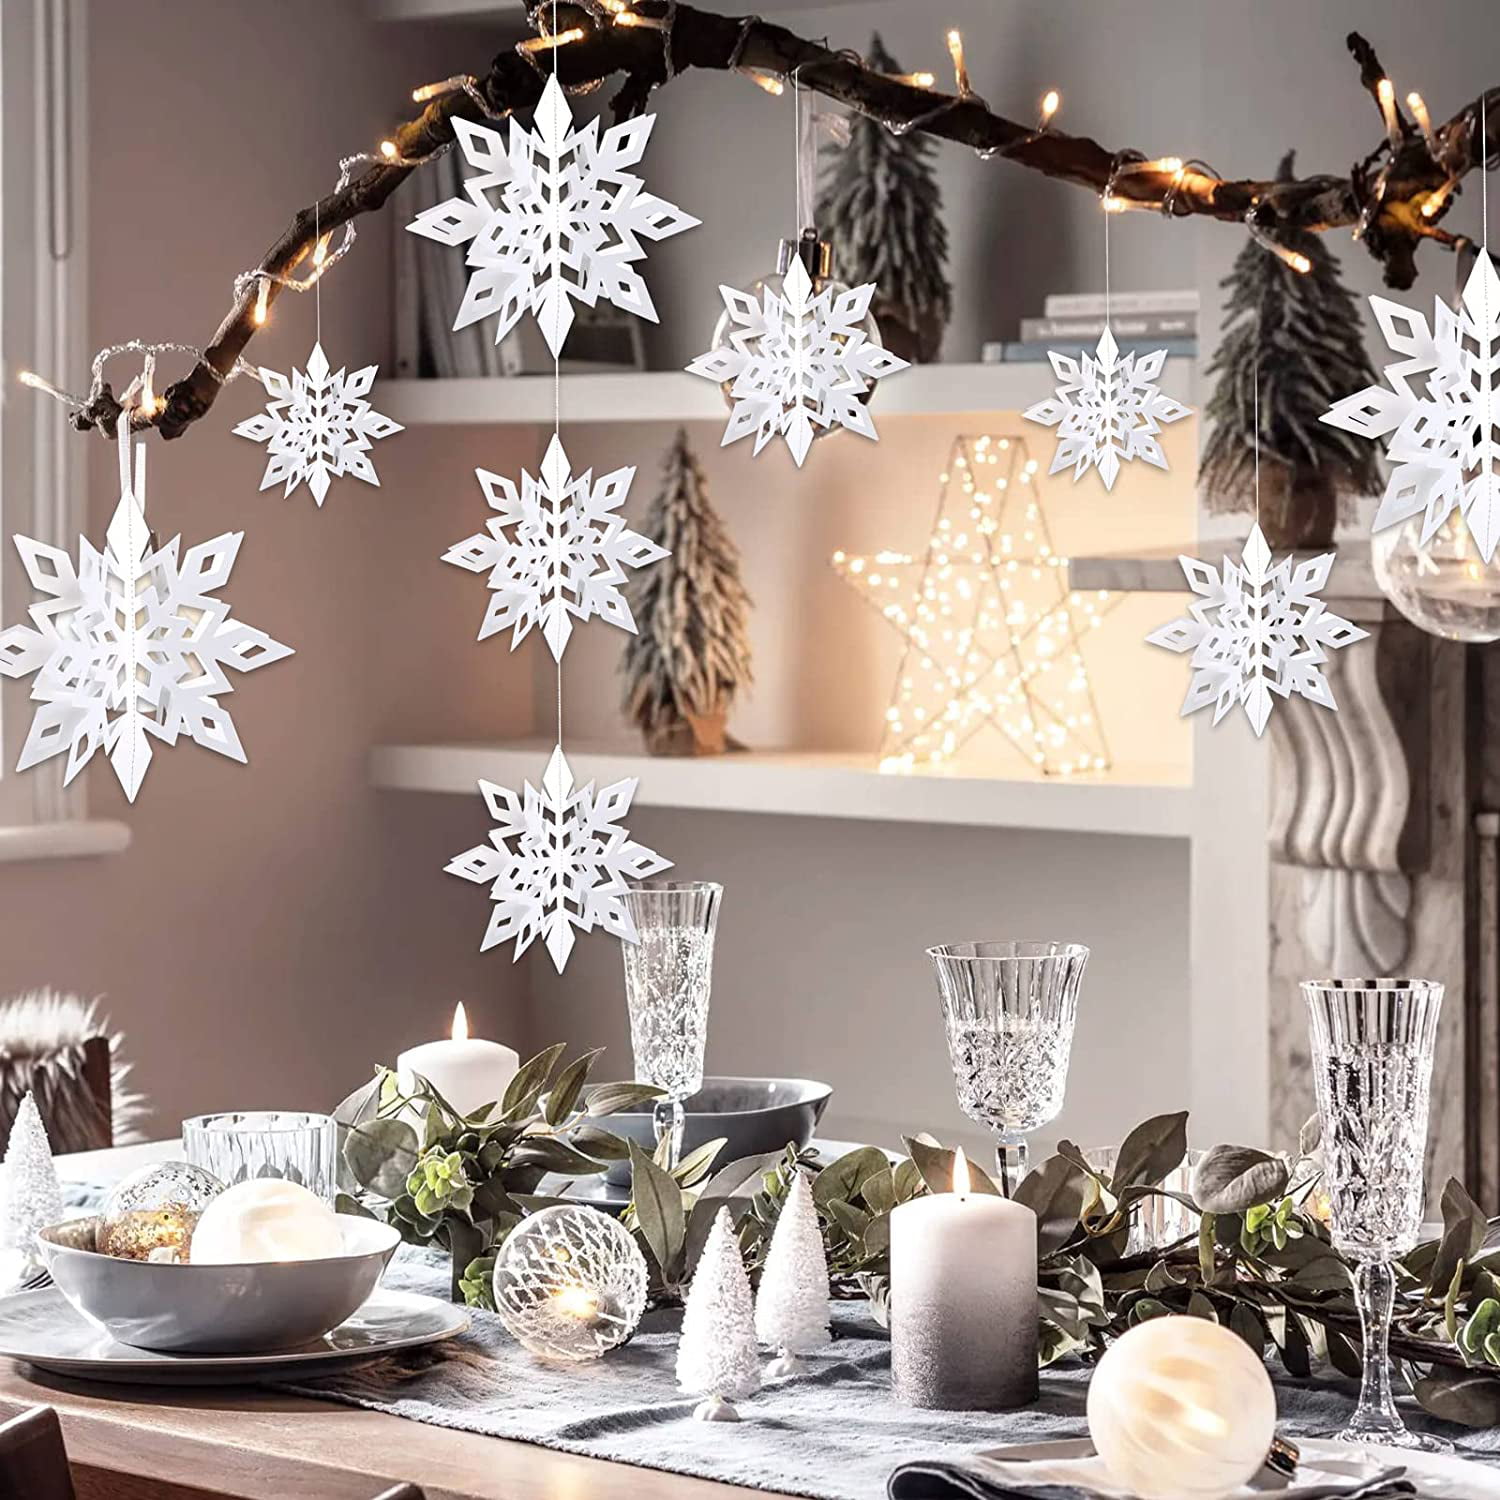 Crafare Christmas Hanging Snowflake Decorations 18pcs 3D White Silver Snowflakes Hanging Garland for Christmas Winter Wonderland Holiday New Year